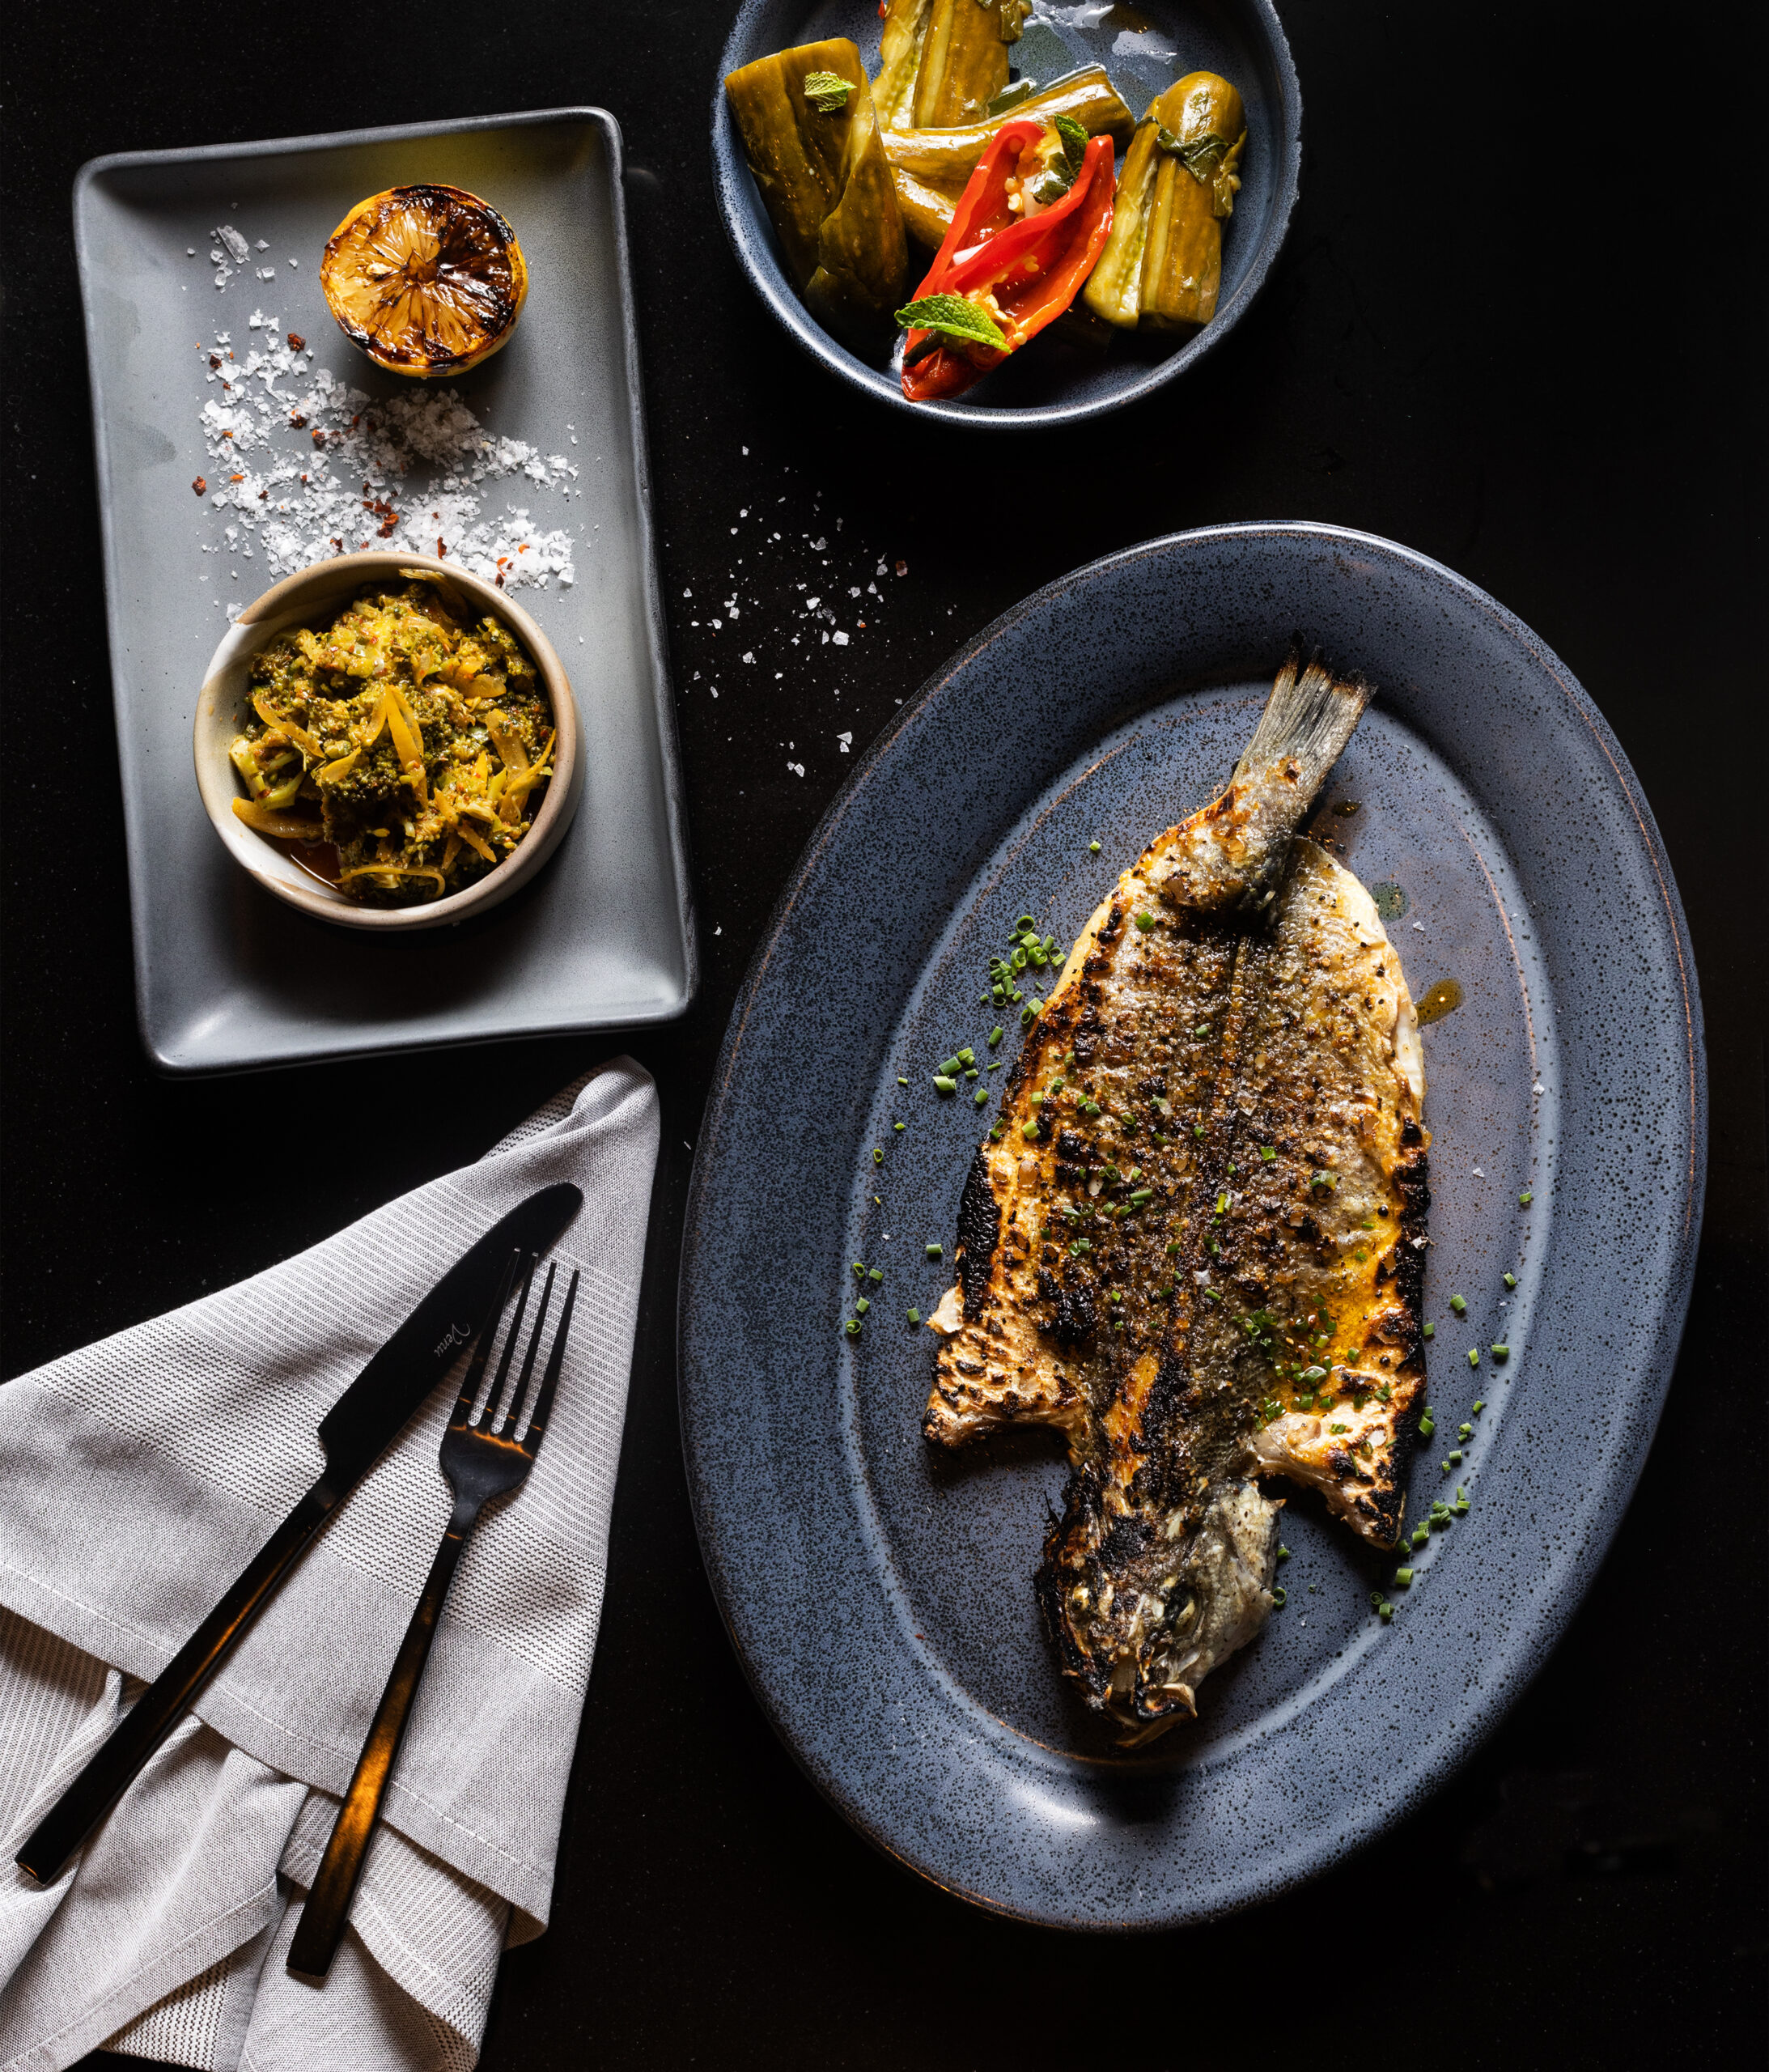 Whole Grilled Bronzino with a side of Broccoli Tabbouleh and homemade pickles from Goldfinch restaurant Wednesday, May 24, 2023, in Sebastopol. (John Burgess/The Press Democrat)